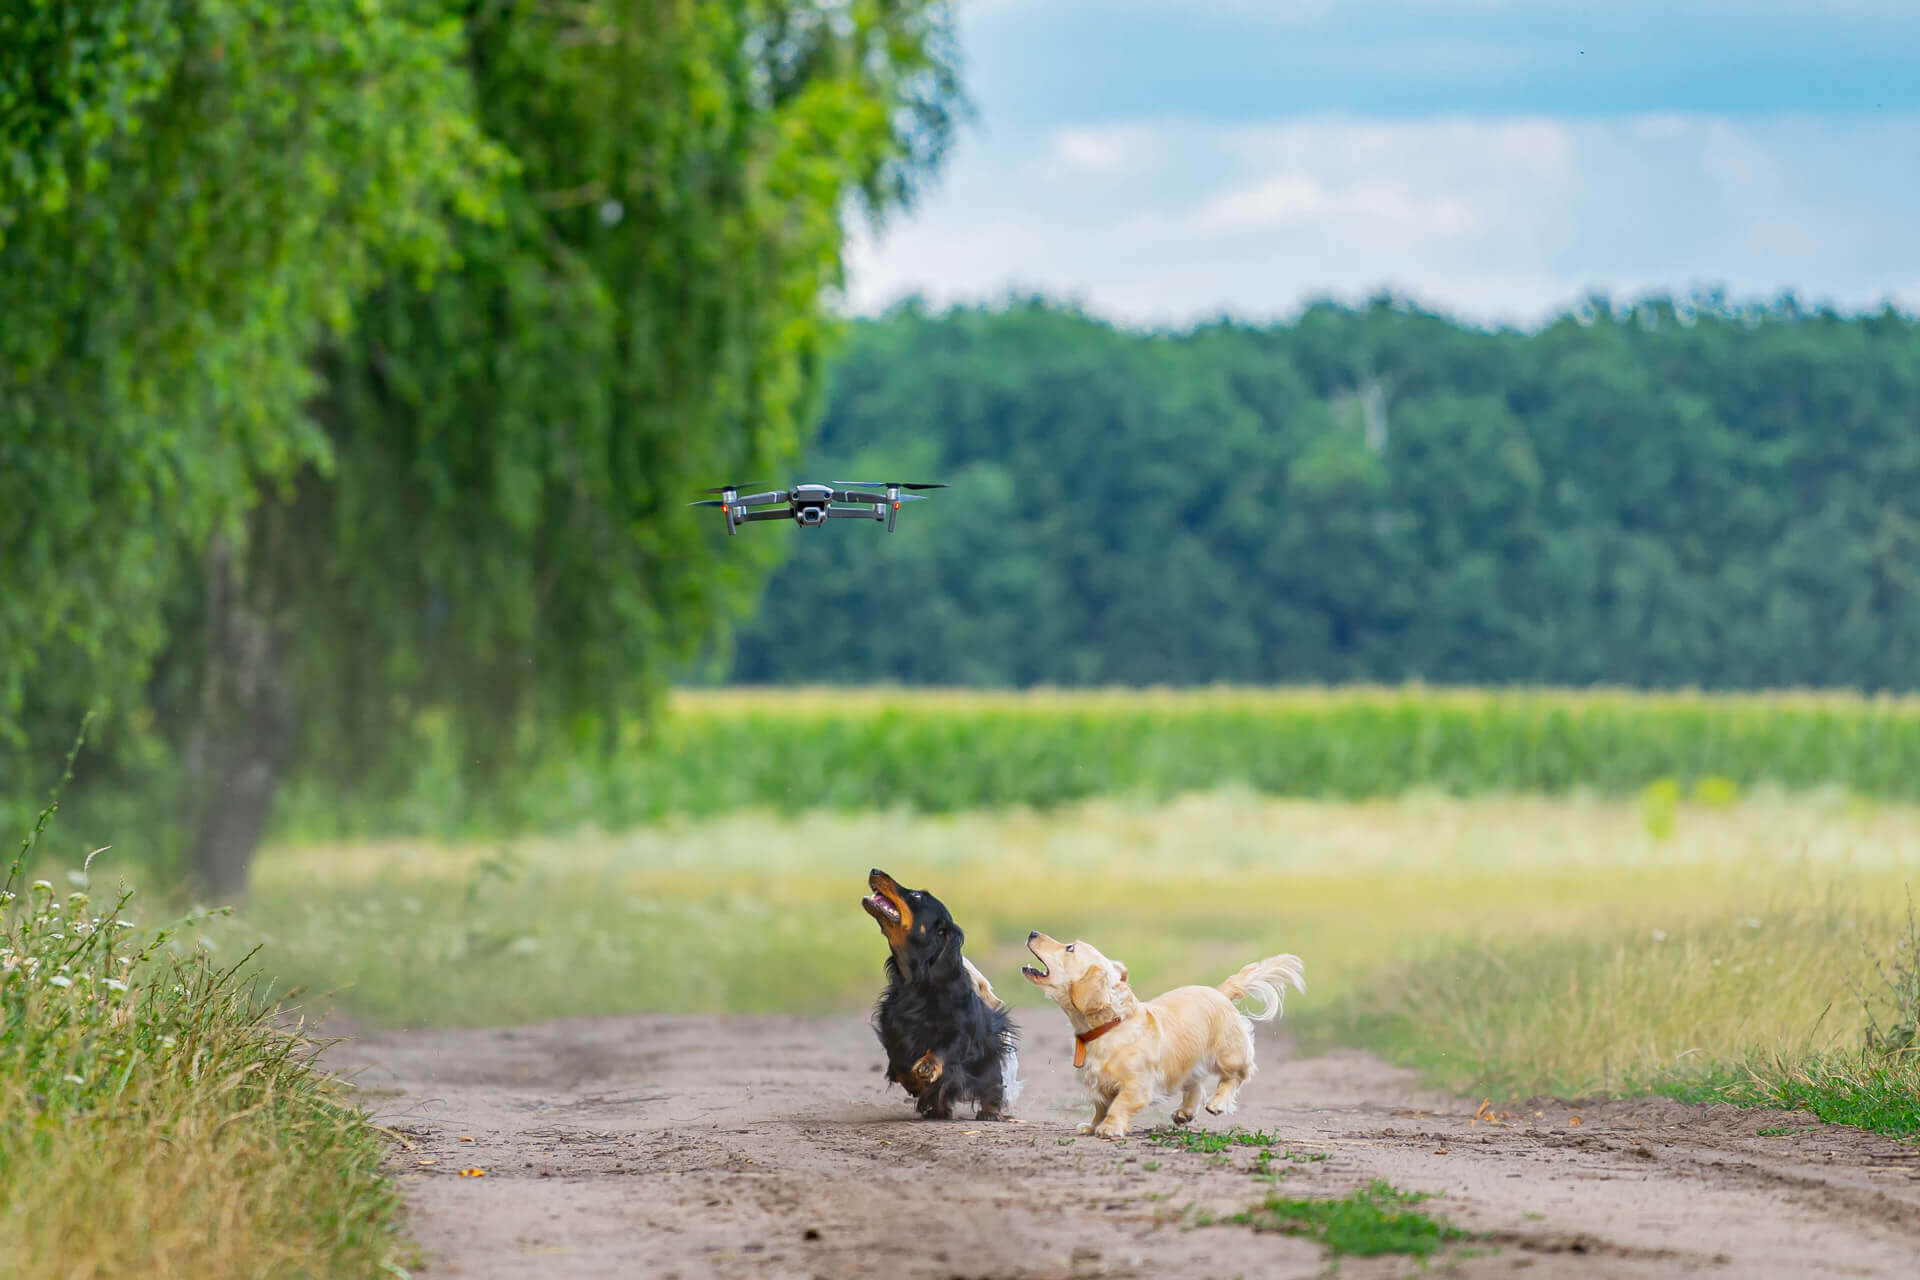 pen tuberculosis Maintenance How drones help rescue lost dogs around the world - Tractive